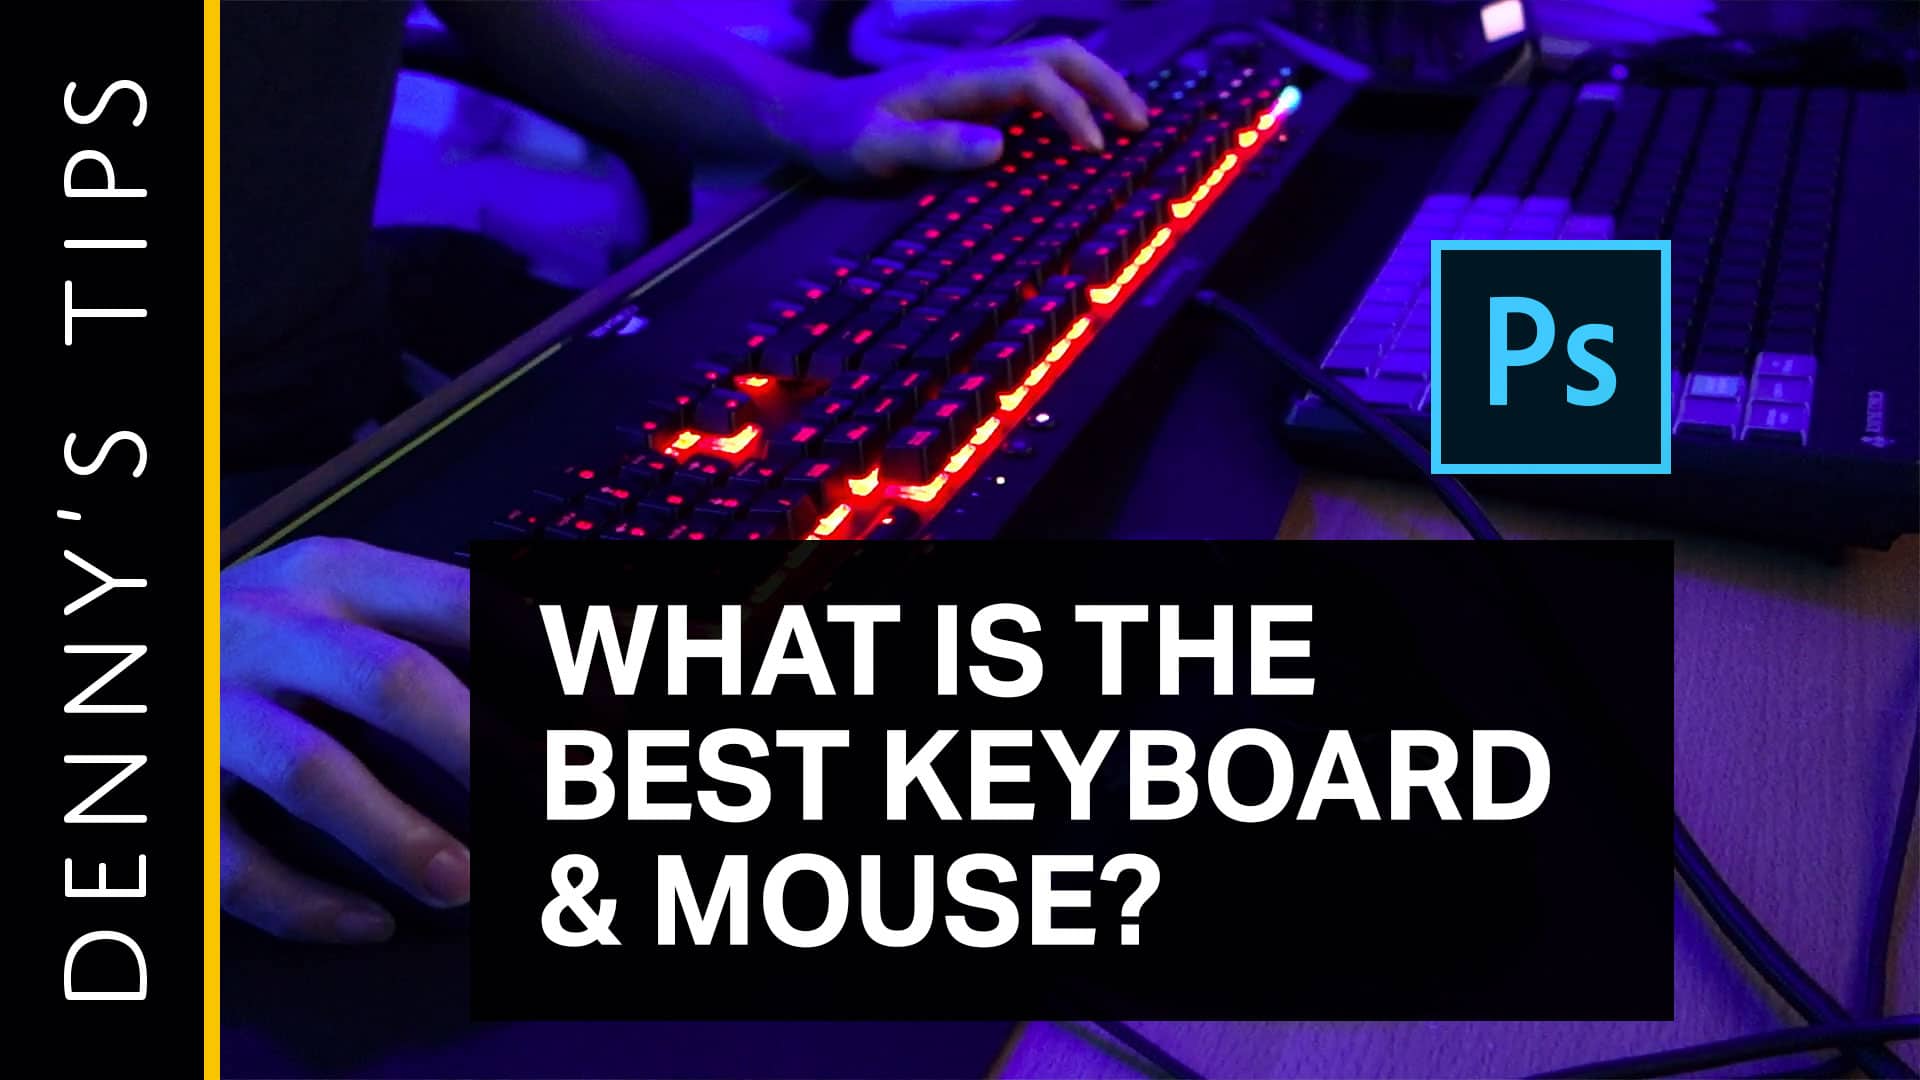 The Best Keyboard and Mouse for Photoshop